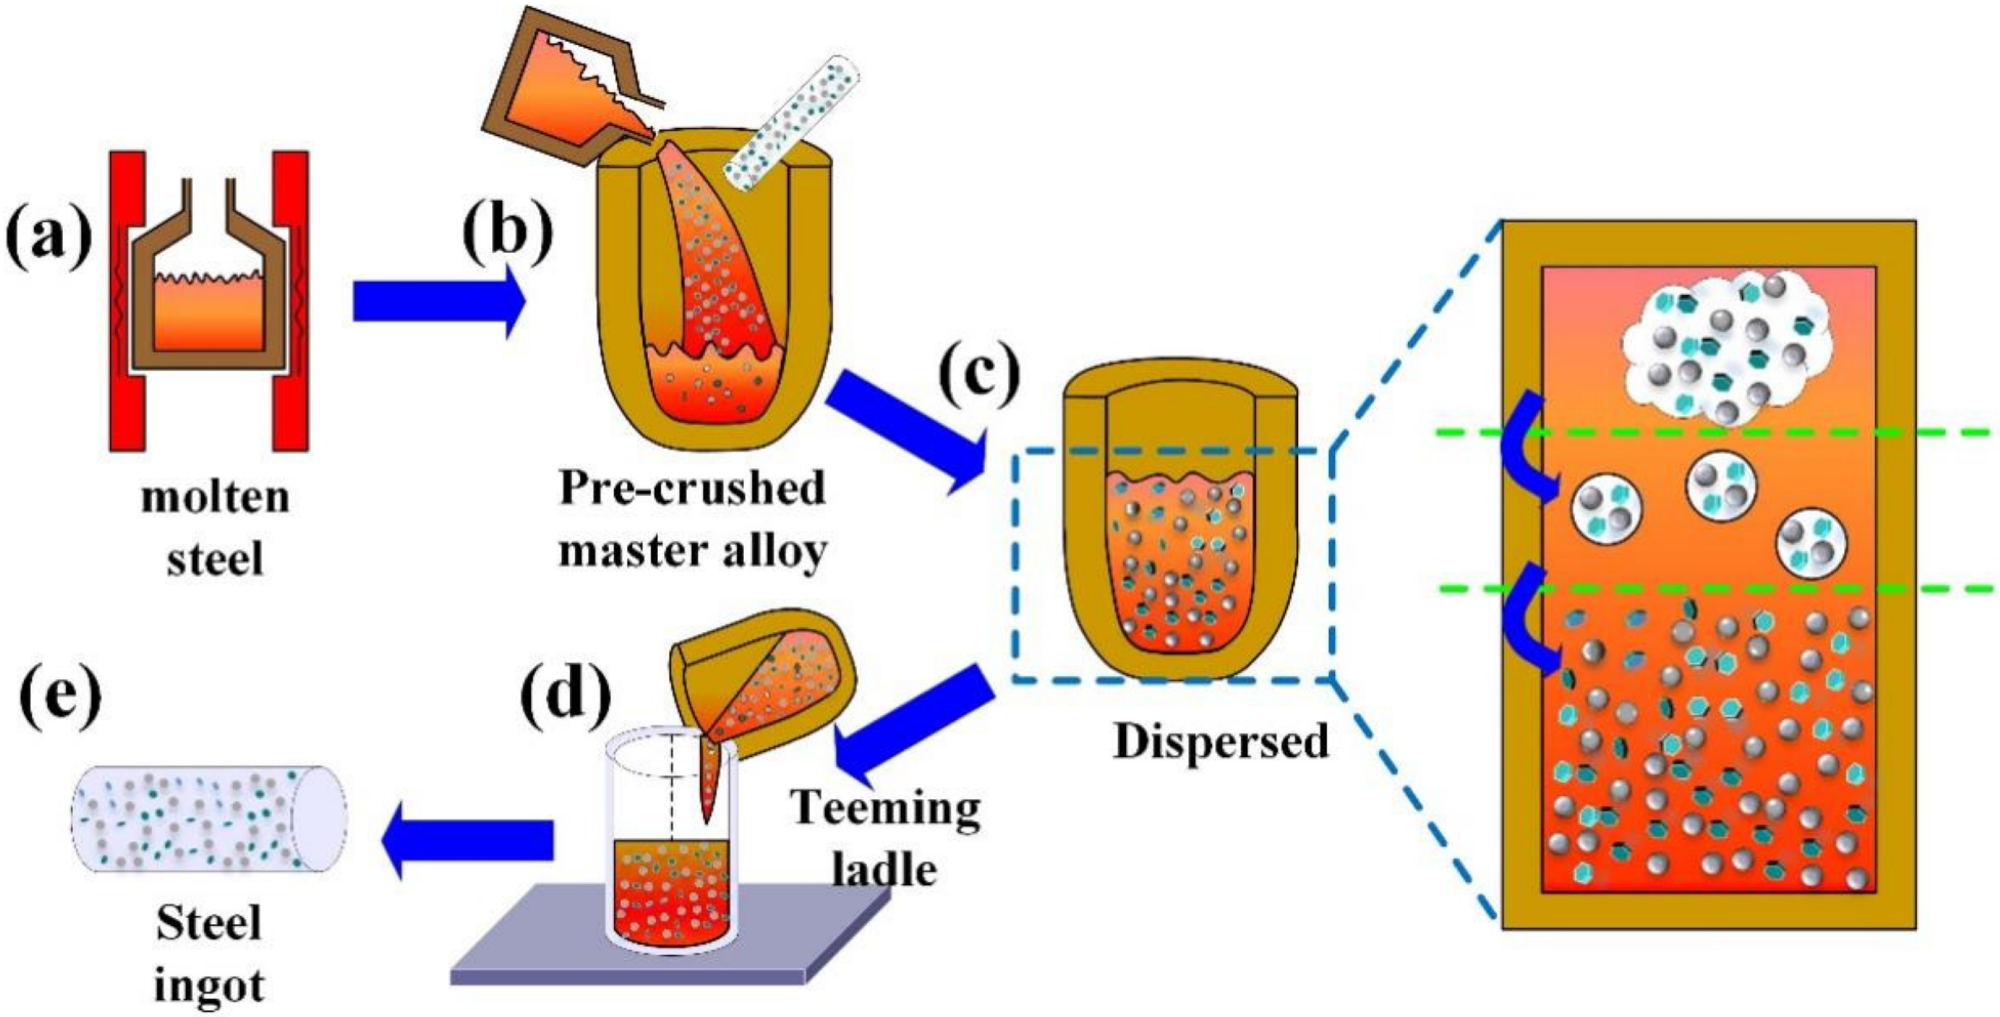 The preparation process of H13 tool and die steels manipulated by trace nanoparticles: (a) melt, (b) addition and release of nanoparticles, (c) uniform distribution of nanoparticles, (d) casting, (e) steel ingot.